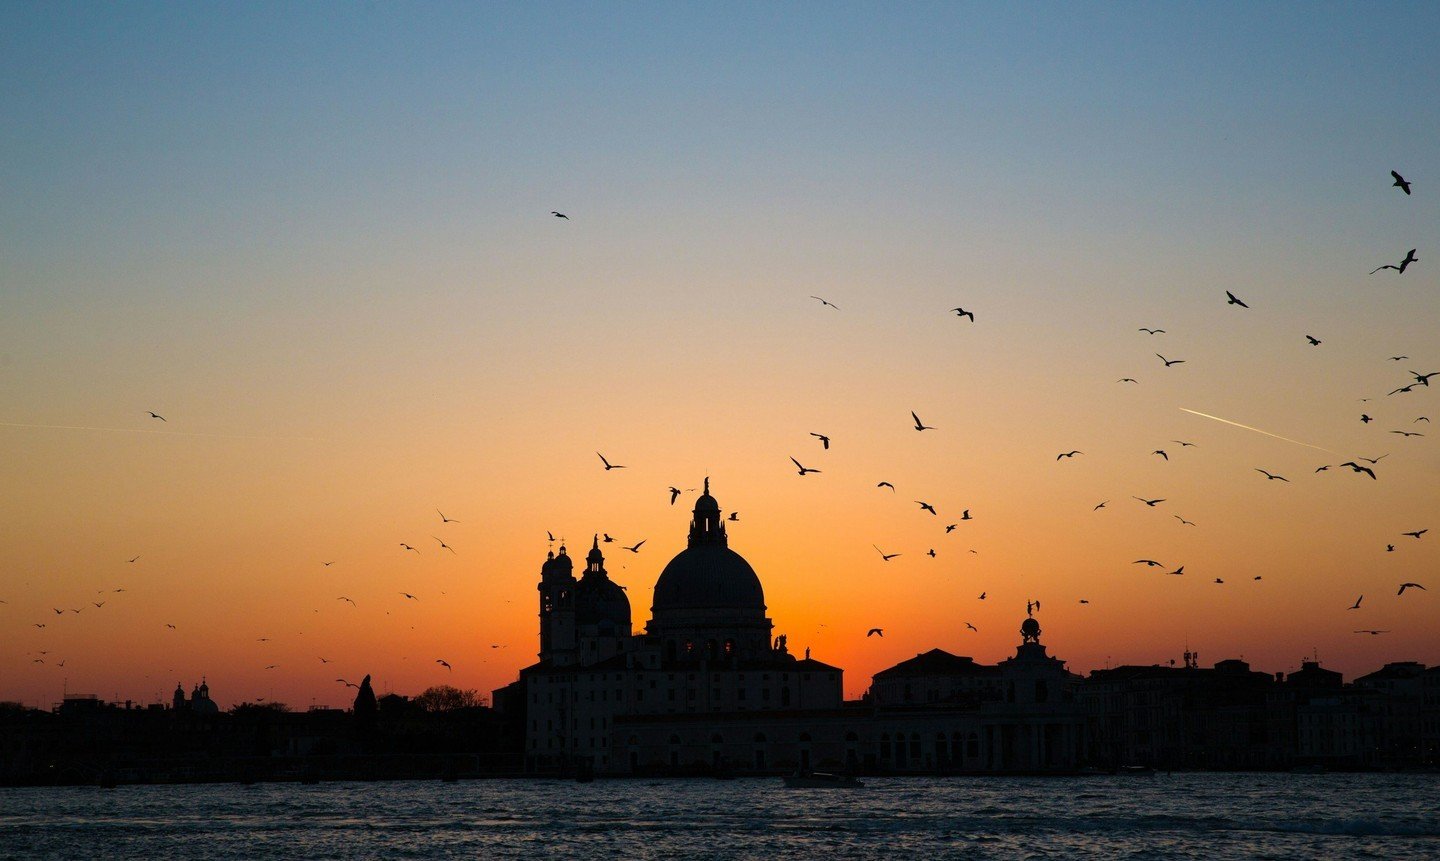 Explore Venice: Your Essential Guide to the City's Splendors
Venice Journal: dive into the heart of Venice with our curated insights. From the rhythm of local life to the best-kept secrets of hotels and eateries, discover the authentic charm of la Se